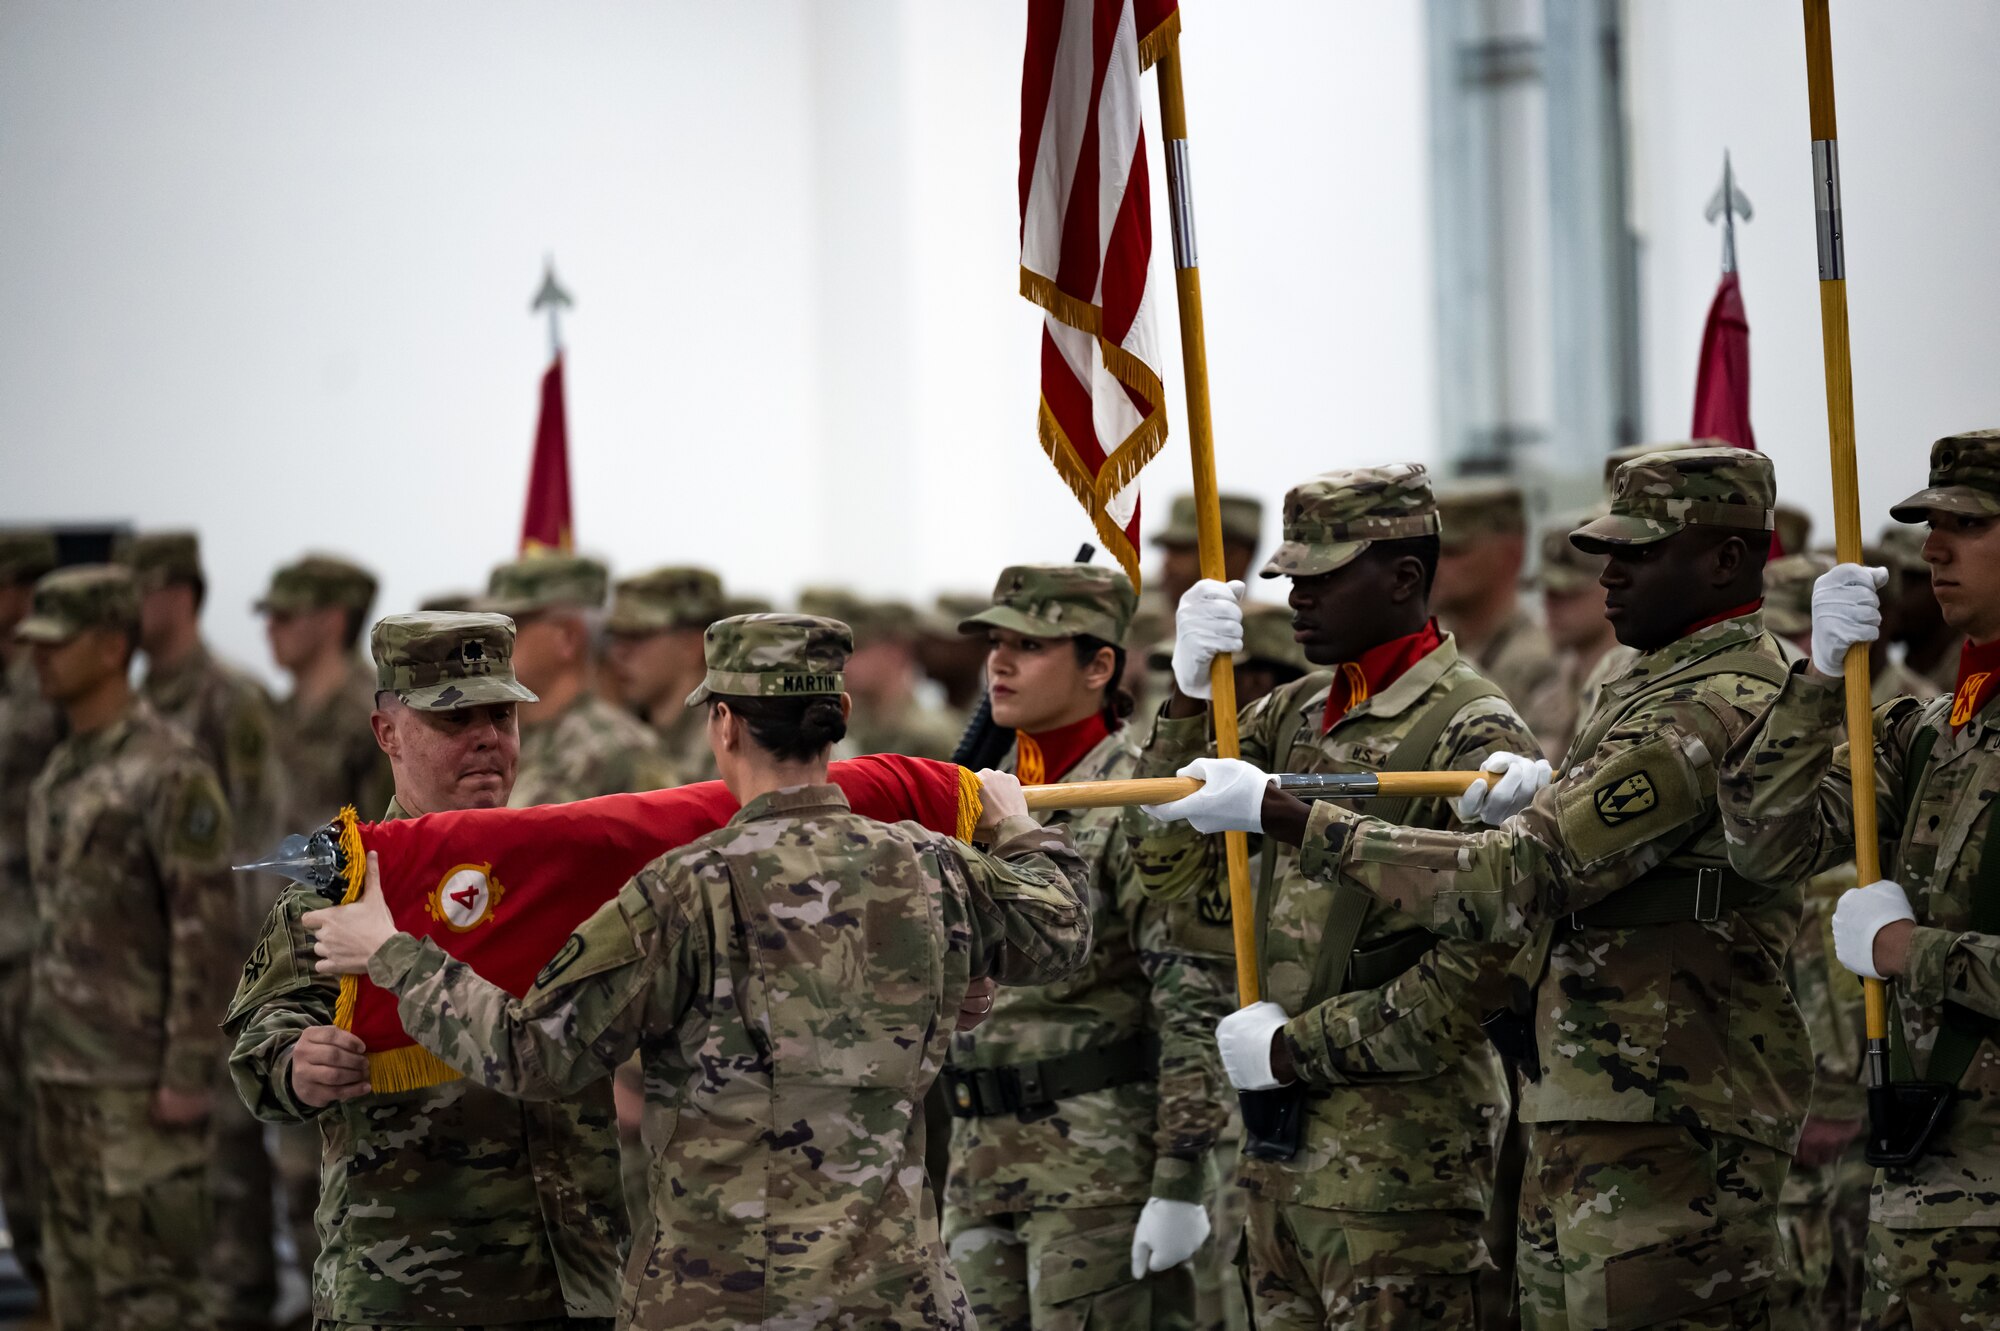 U.S. Army Lt. Col. Paul Mendoza, Commander of the 4th Battalion 3rd Air Defense Artillery Regiment (4-3 ADA), and U.S. Army Command Sgt. Maj. Brooke Martin, 4-3 ADA command sergeant major, case the 4-3 ADA flag during a transfer of authority on Jan. 26, 2023, Al Dhafra Air Base, United Arab Emirates. The 4-3 ADA transferred responsibility of the MIM-104 Patriot missile systems at Al Dhafra AB to the 2nd Battalion 43rd Air Defense Artillery Regiment before returning to garrison at Ft. Sill, Oklahoma.